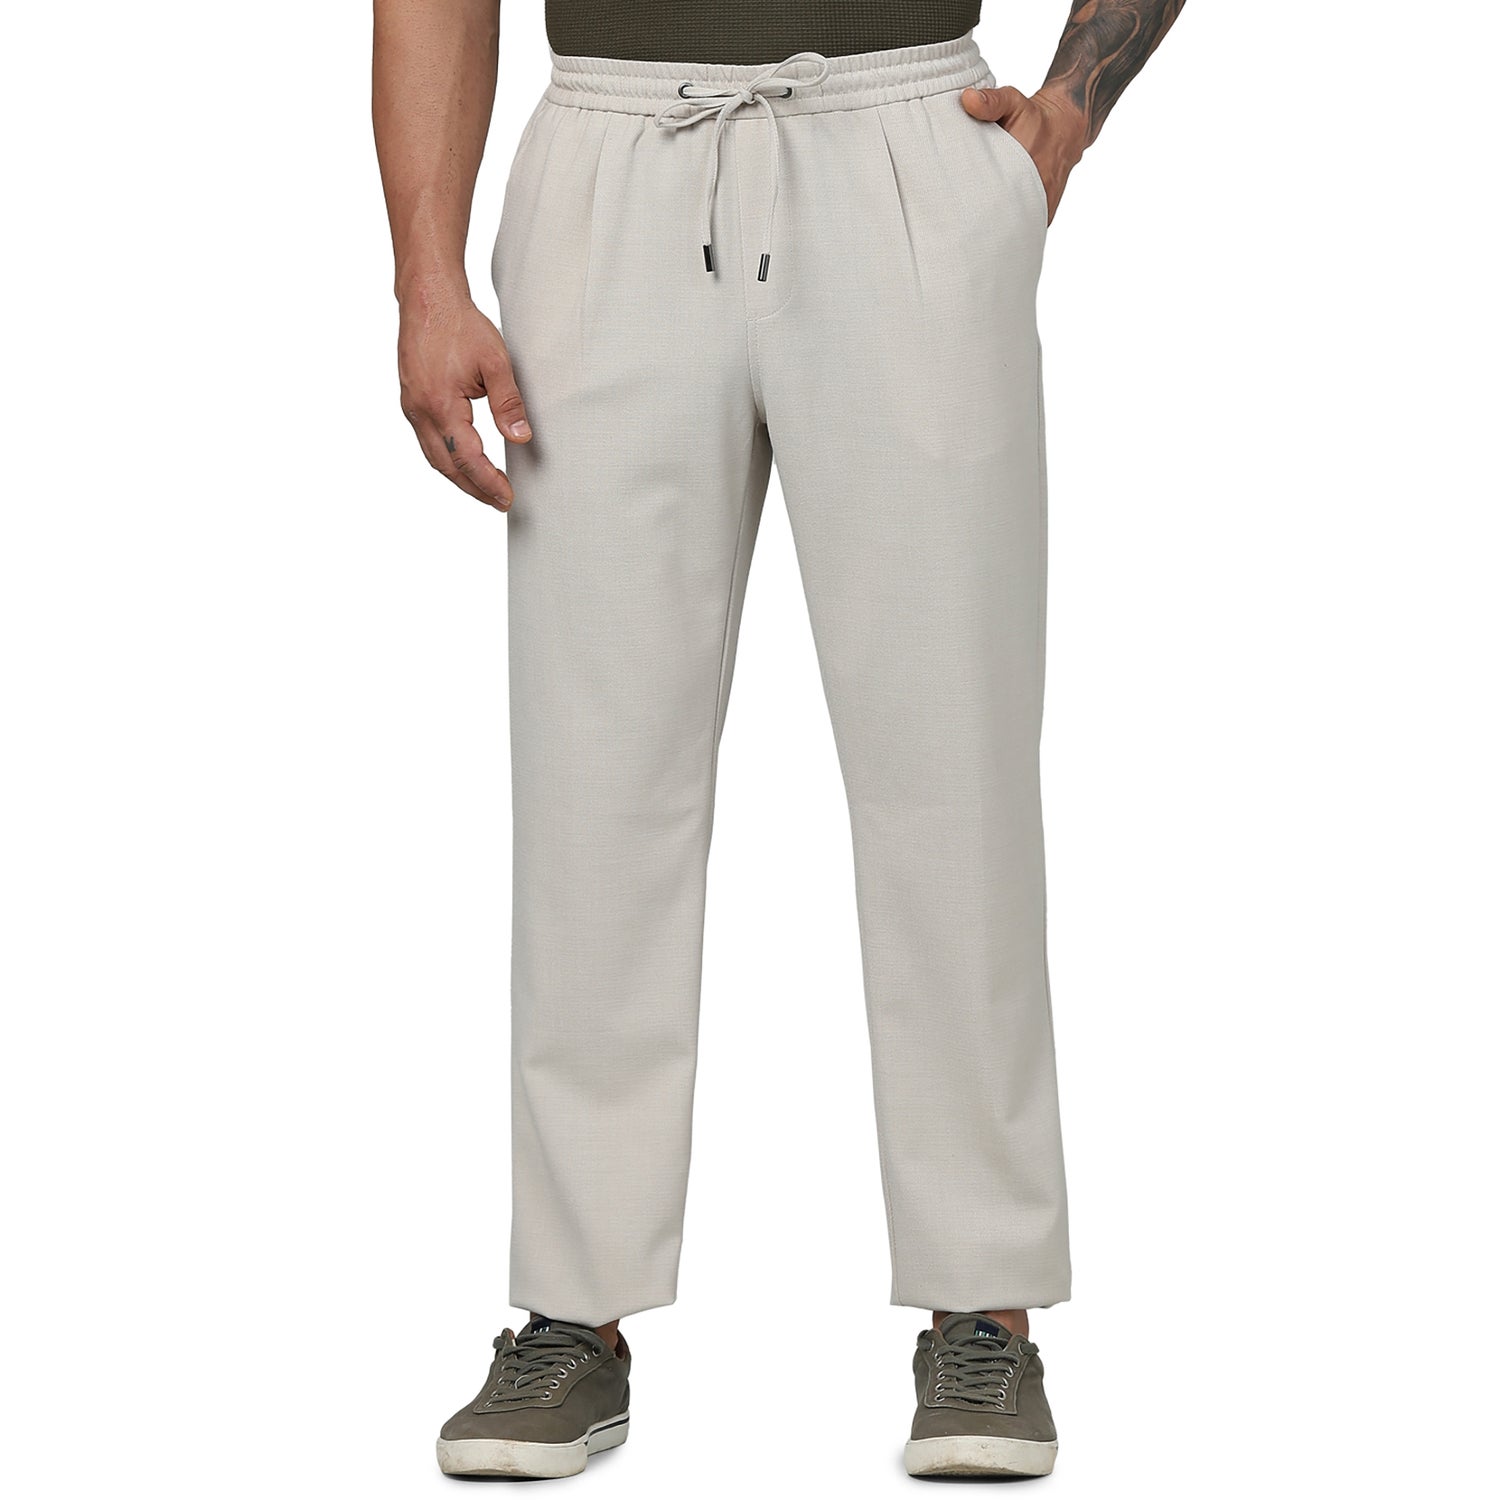 Men's Beige Solid Regular Fit Polyester Fashion Casual Trousers (GOPICK)